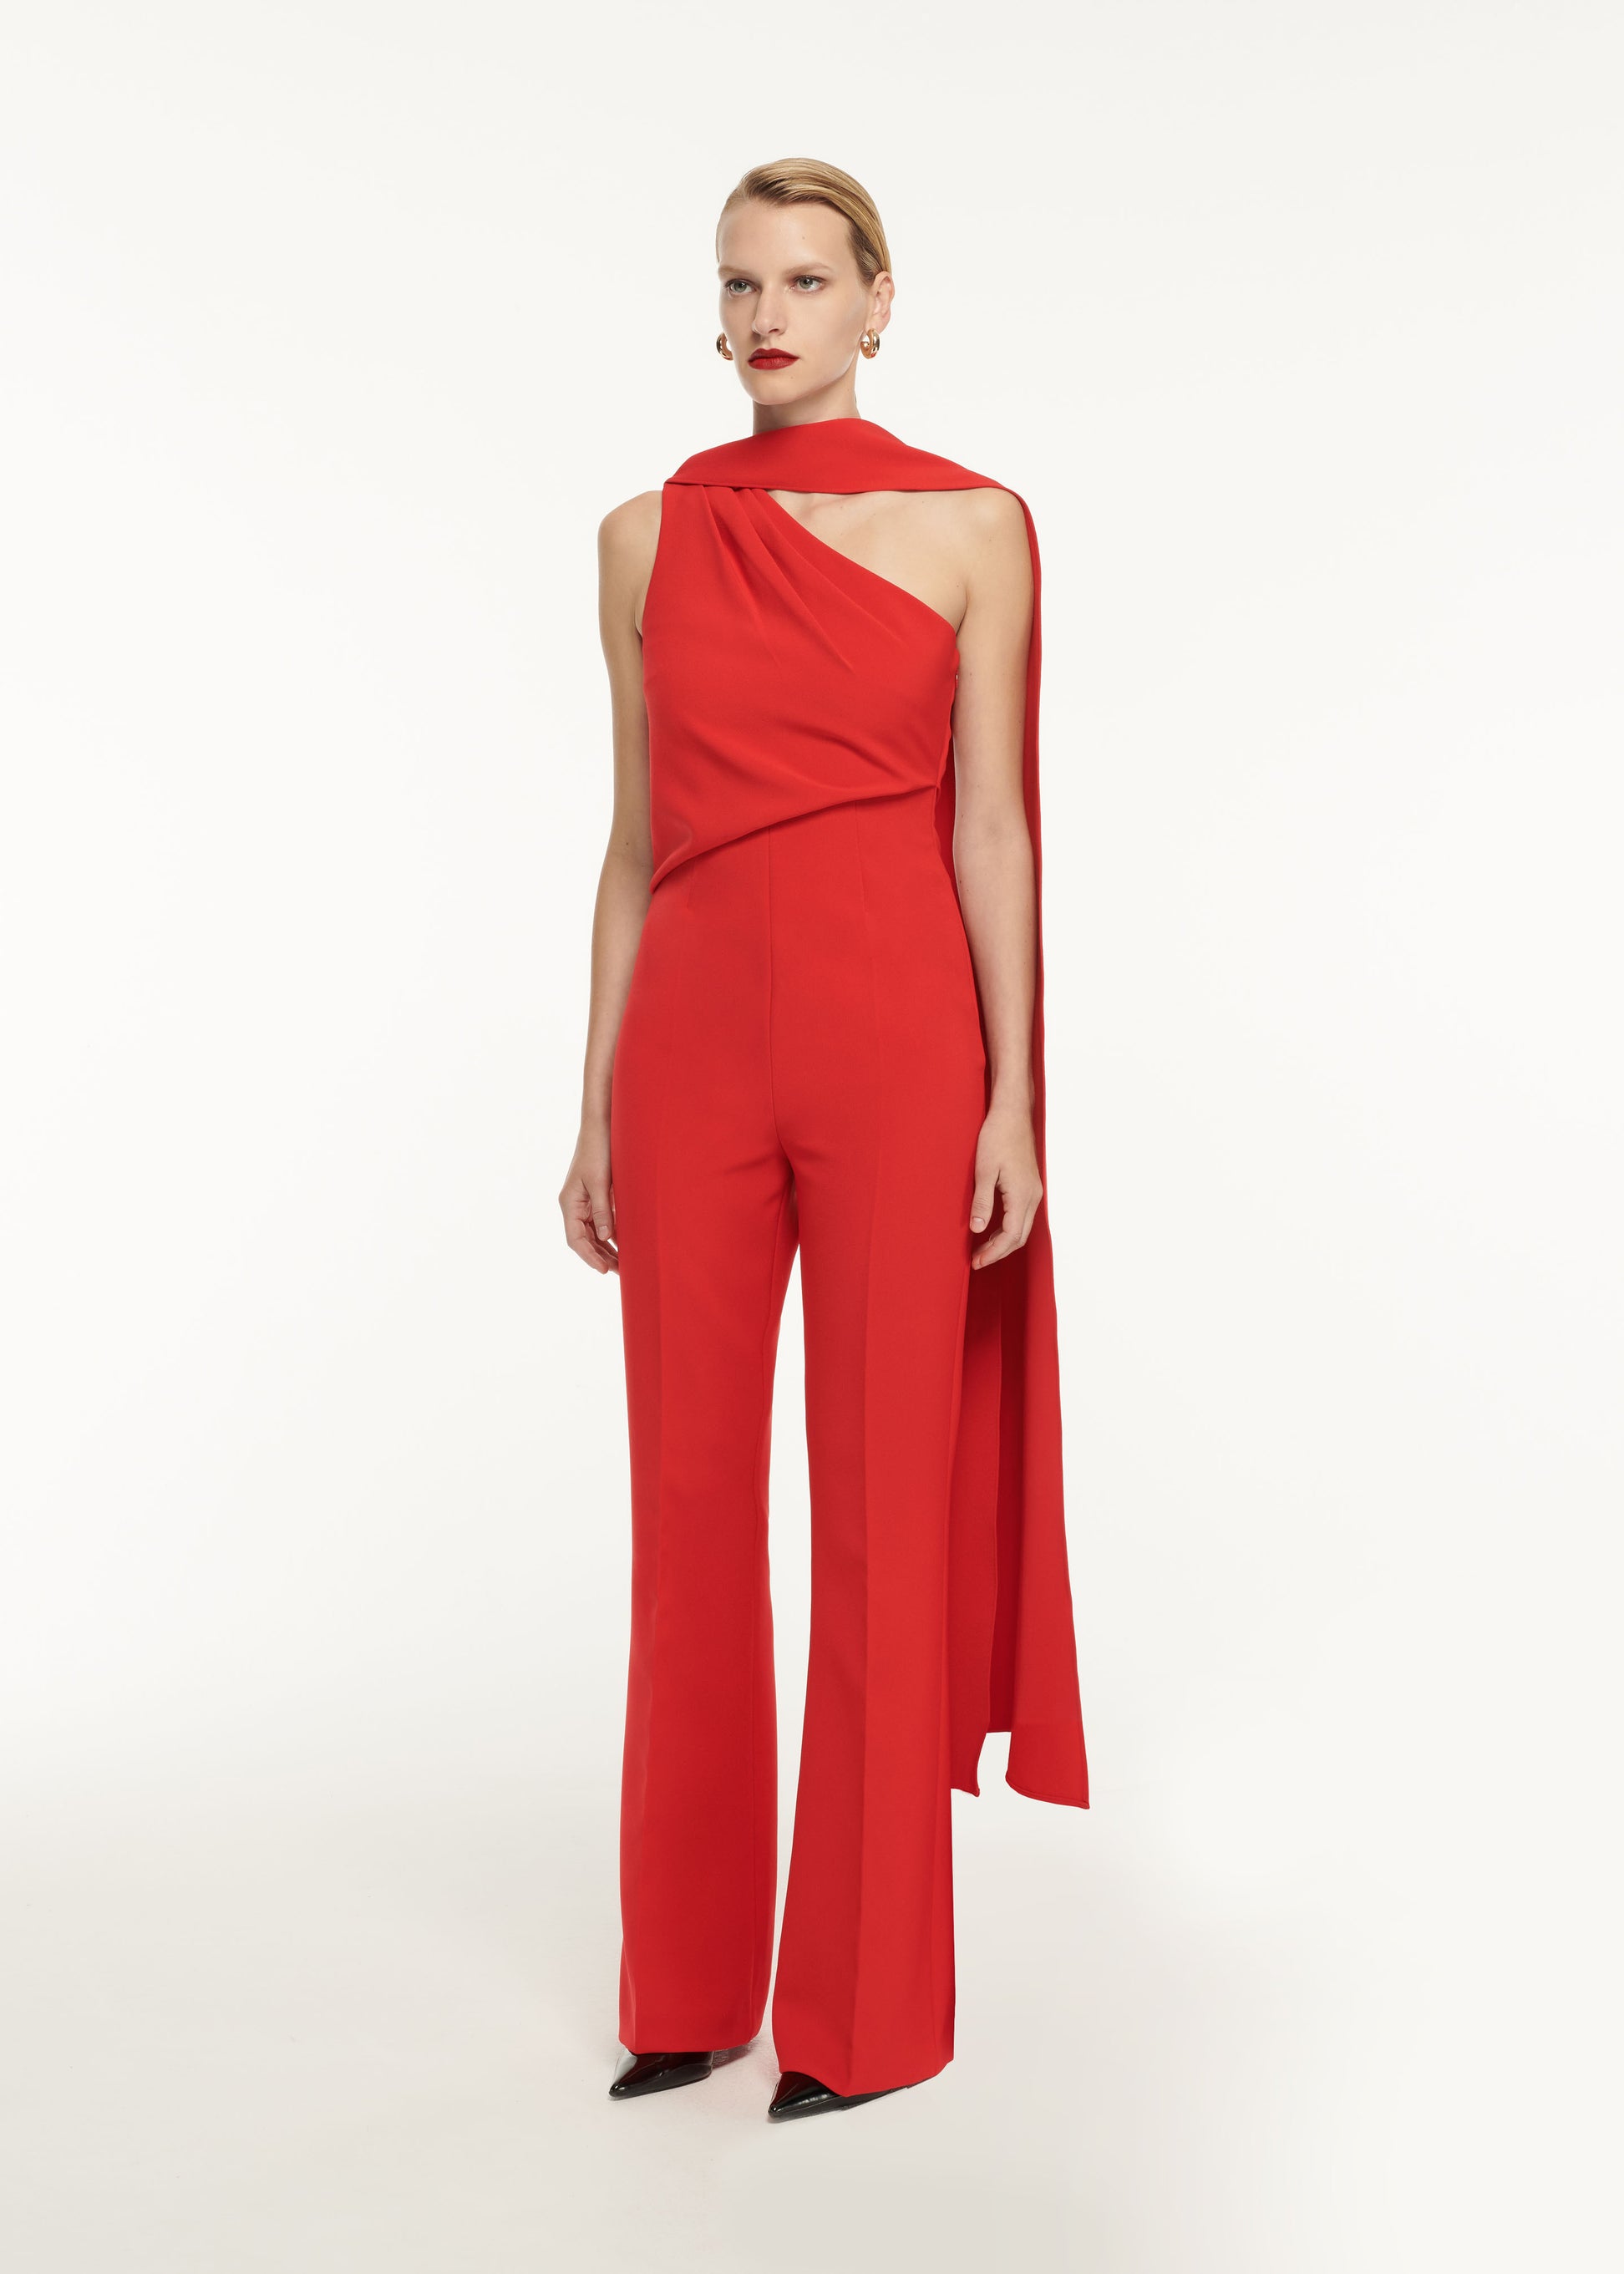 A woman wearing the Asymmetric Crepe Jumpsuit Red